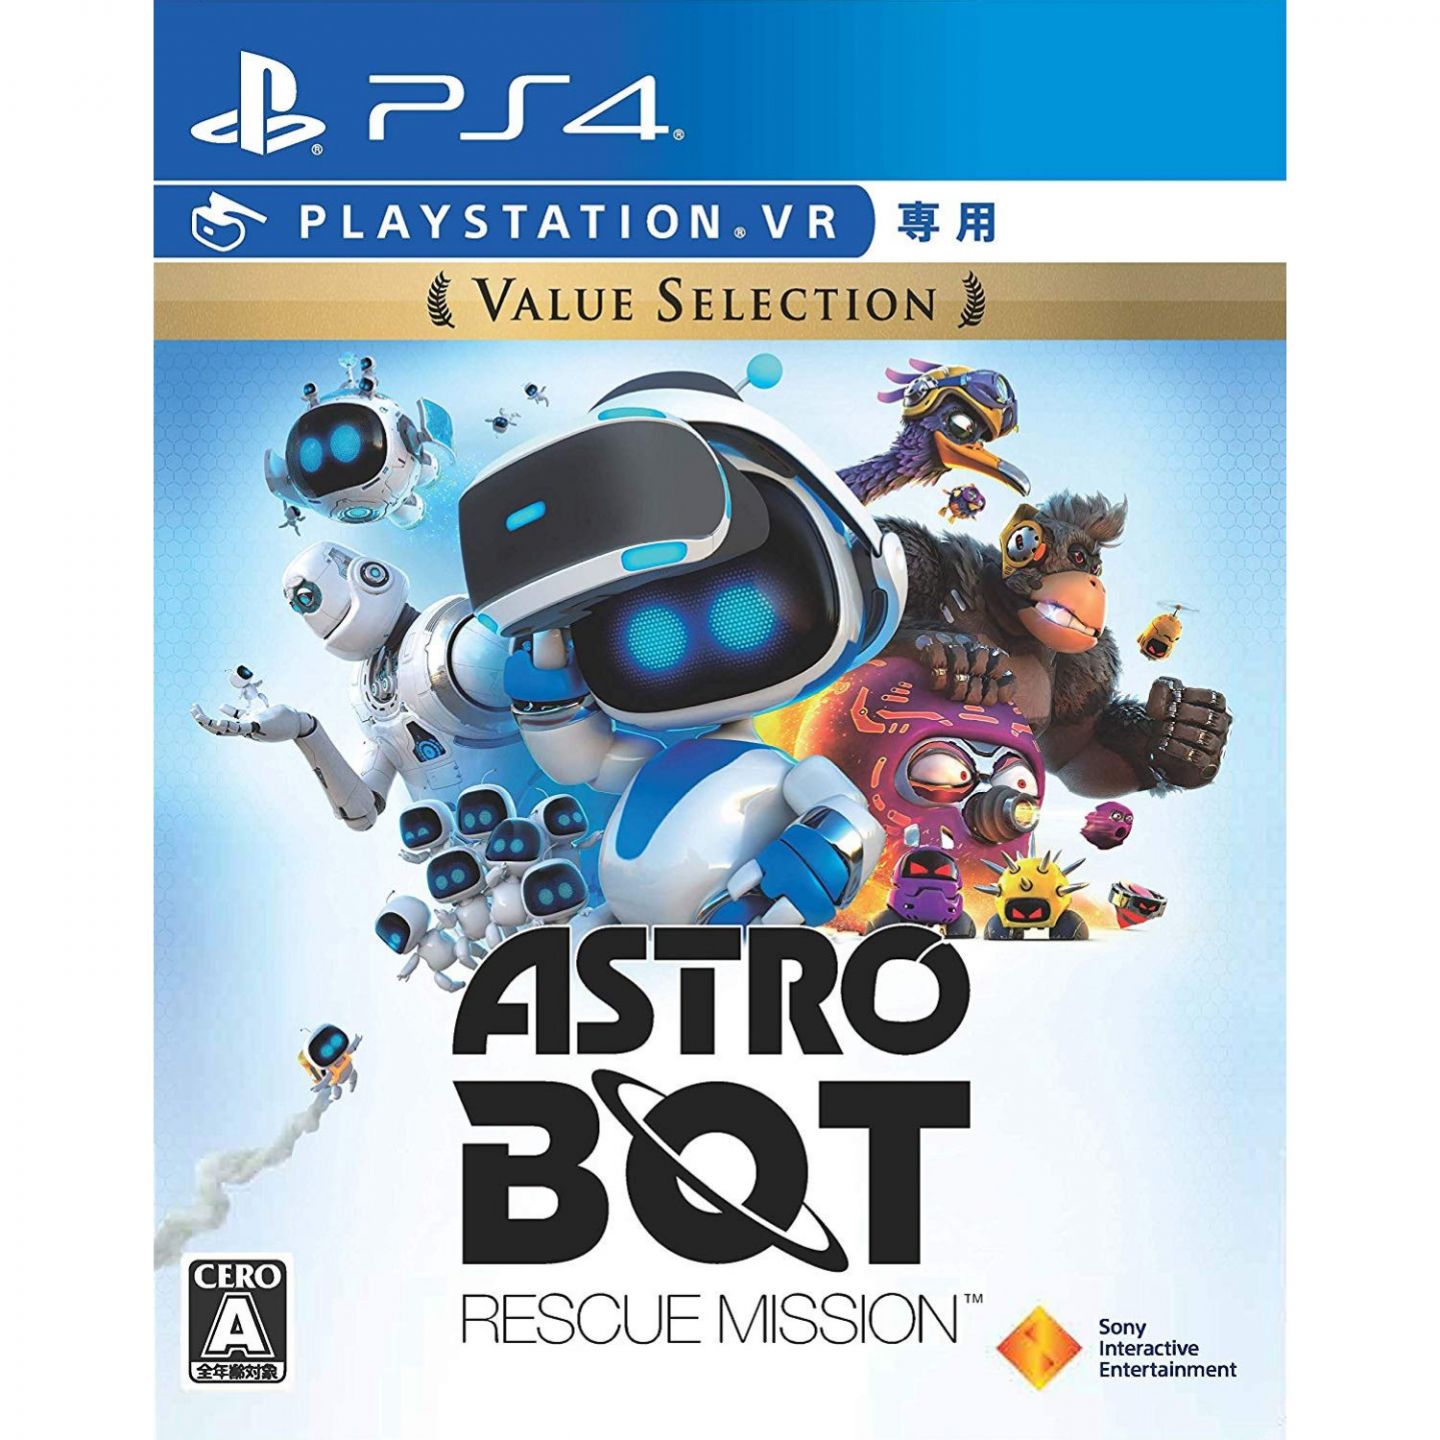 Mission 4 PLAYSTATION PS4 Astro Rescue Bot SONY VR